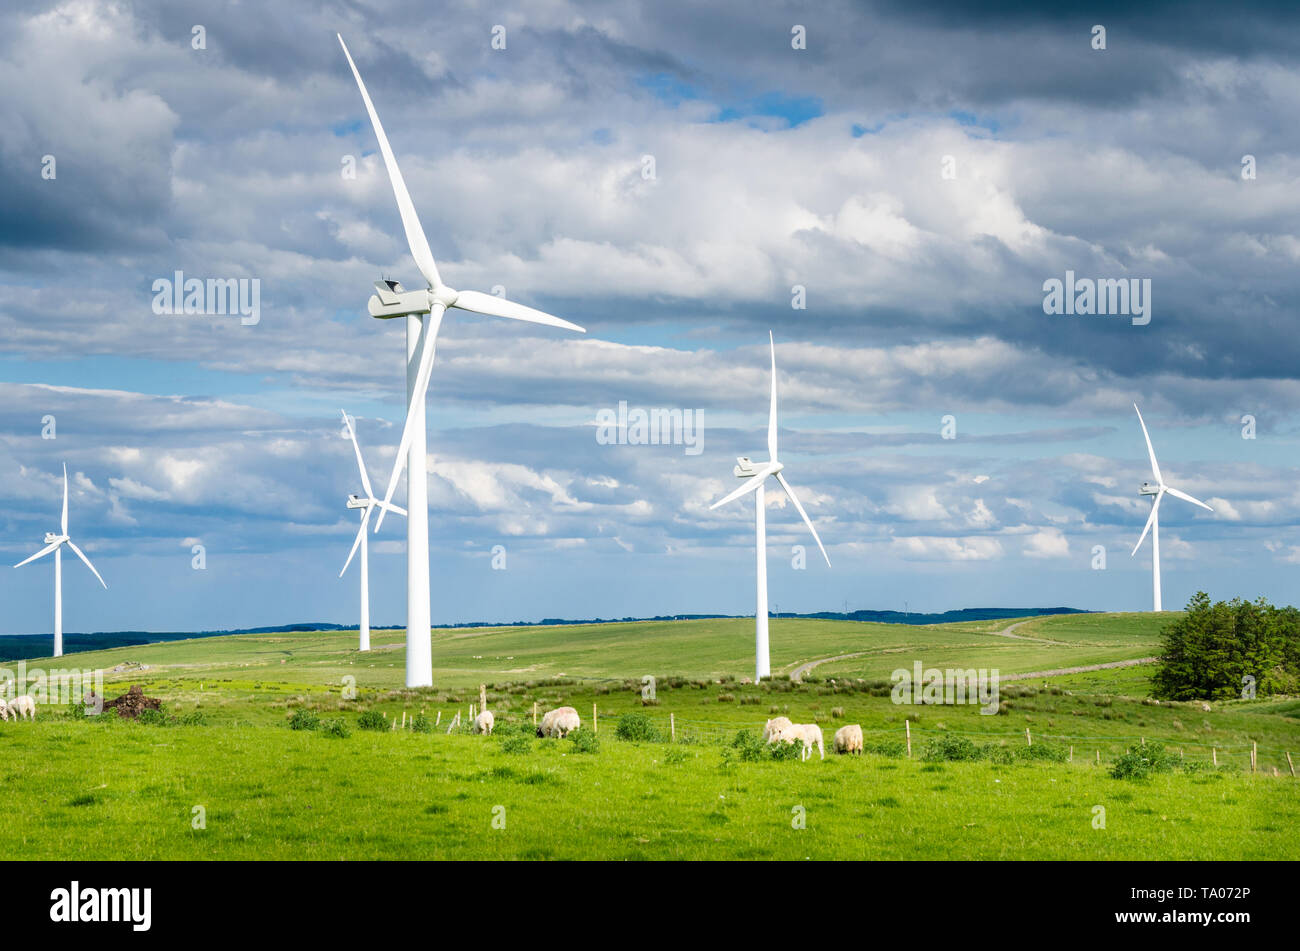 Widn farm in a rolling rural landscape on a cloudy spring day. Grazing sheep are in visible in foreground. Northumberland, England, UK. Stock Photo